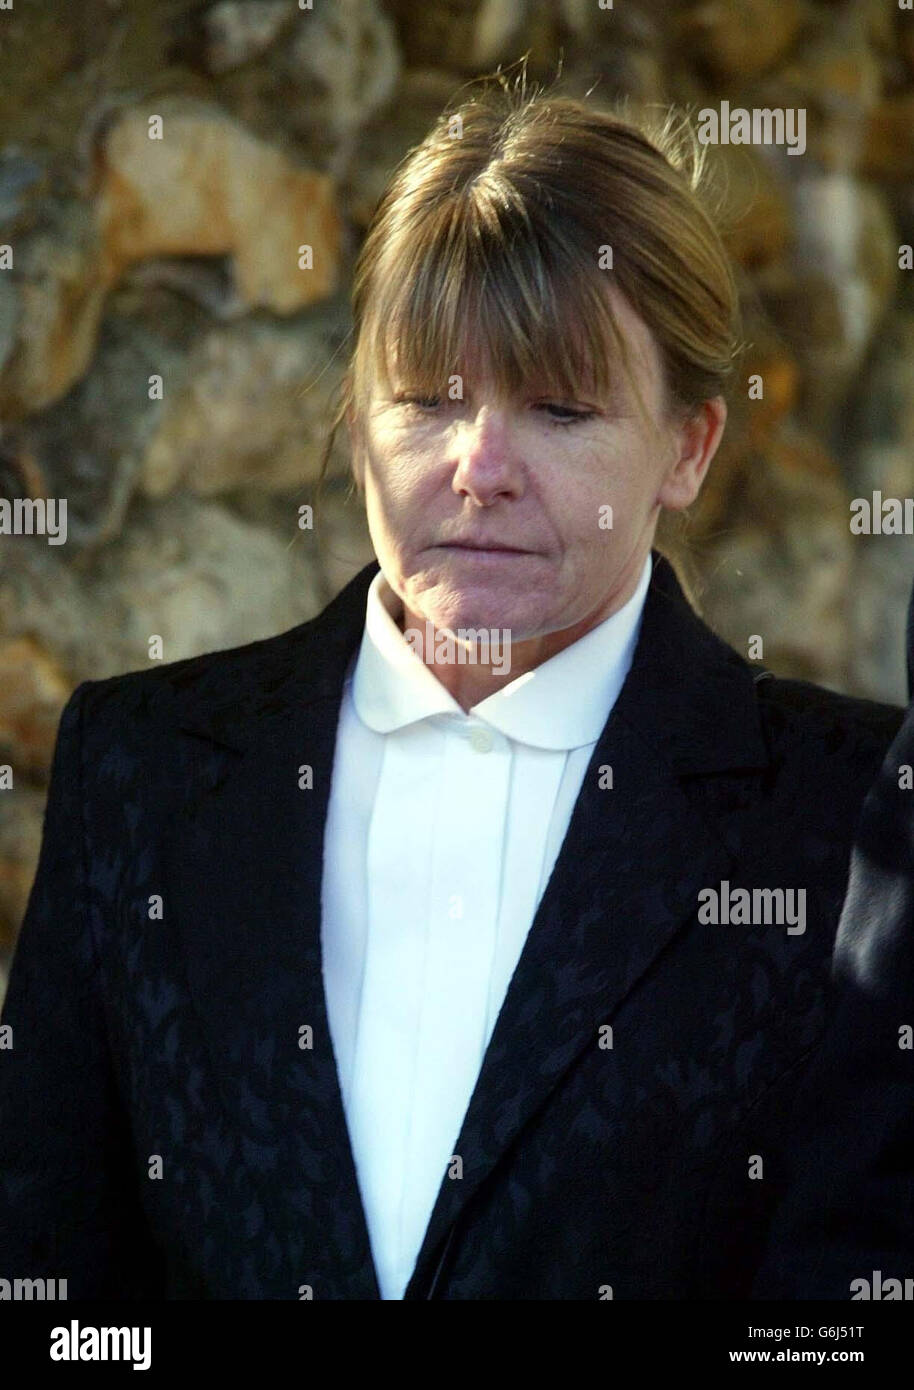 Retired deputy head Mary Kyne, 52, arrives at Norwich County Court to sue veteran comic Jim Davidson. Davidson is facing a damages claim from Newcastle upon Tyne-based Mrs Kyne who injured her back in a fall at a pier complex run by the entertainer. Mrs Kyne claims she suffered the injury after slipping on a patch of wet grass and tripping over uneven concrete at the Wellington Pier complex in Great Yarmouth, Norfolk. She was forced to give up work two years after the accident. Mr Davidson was leaseholder of the site in May 1999 when the accident happened but no longer runs the complex. Stock Photo